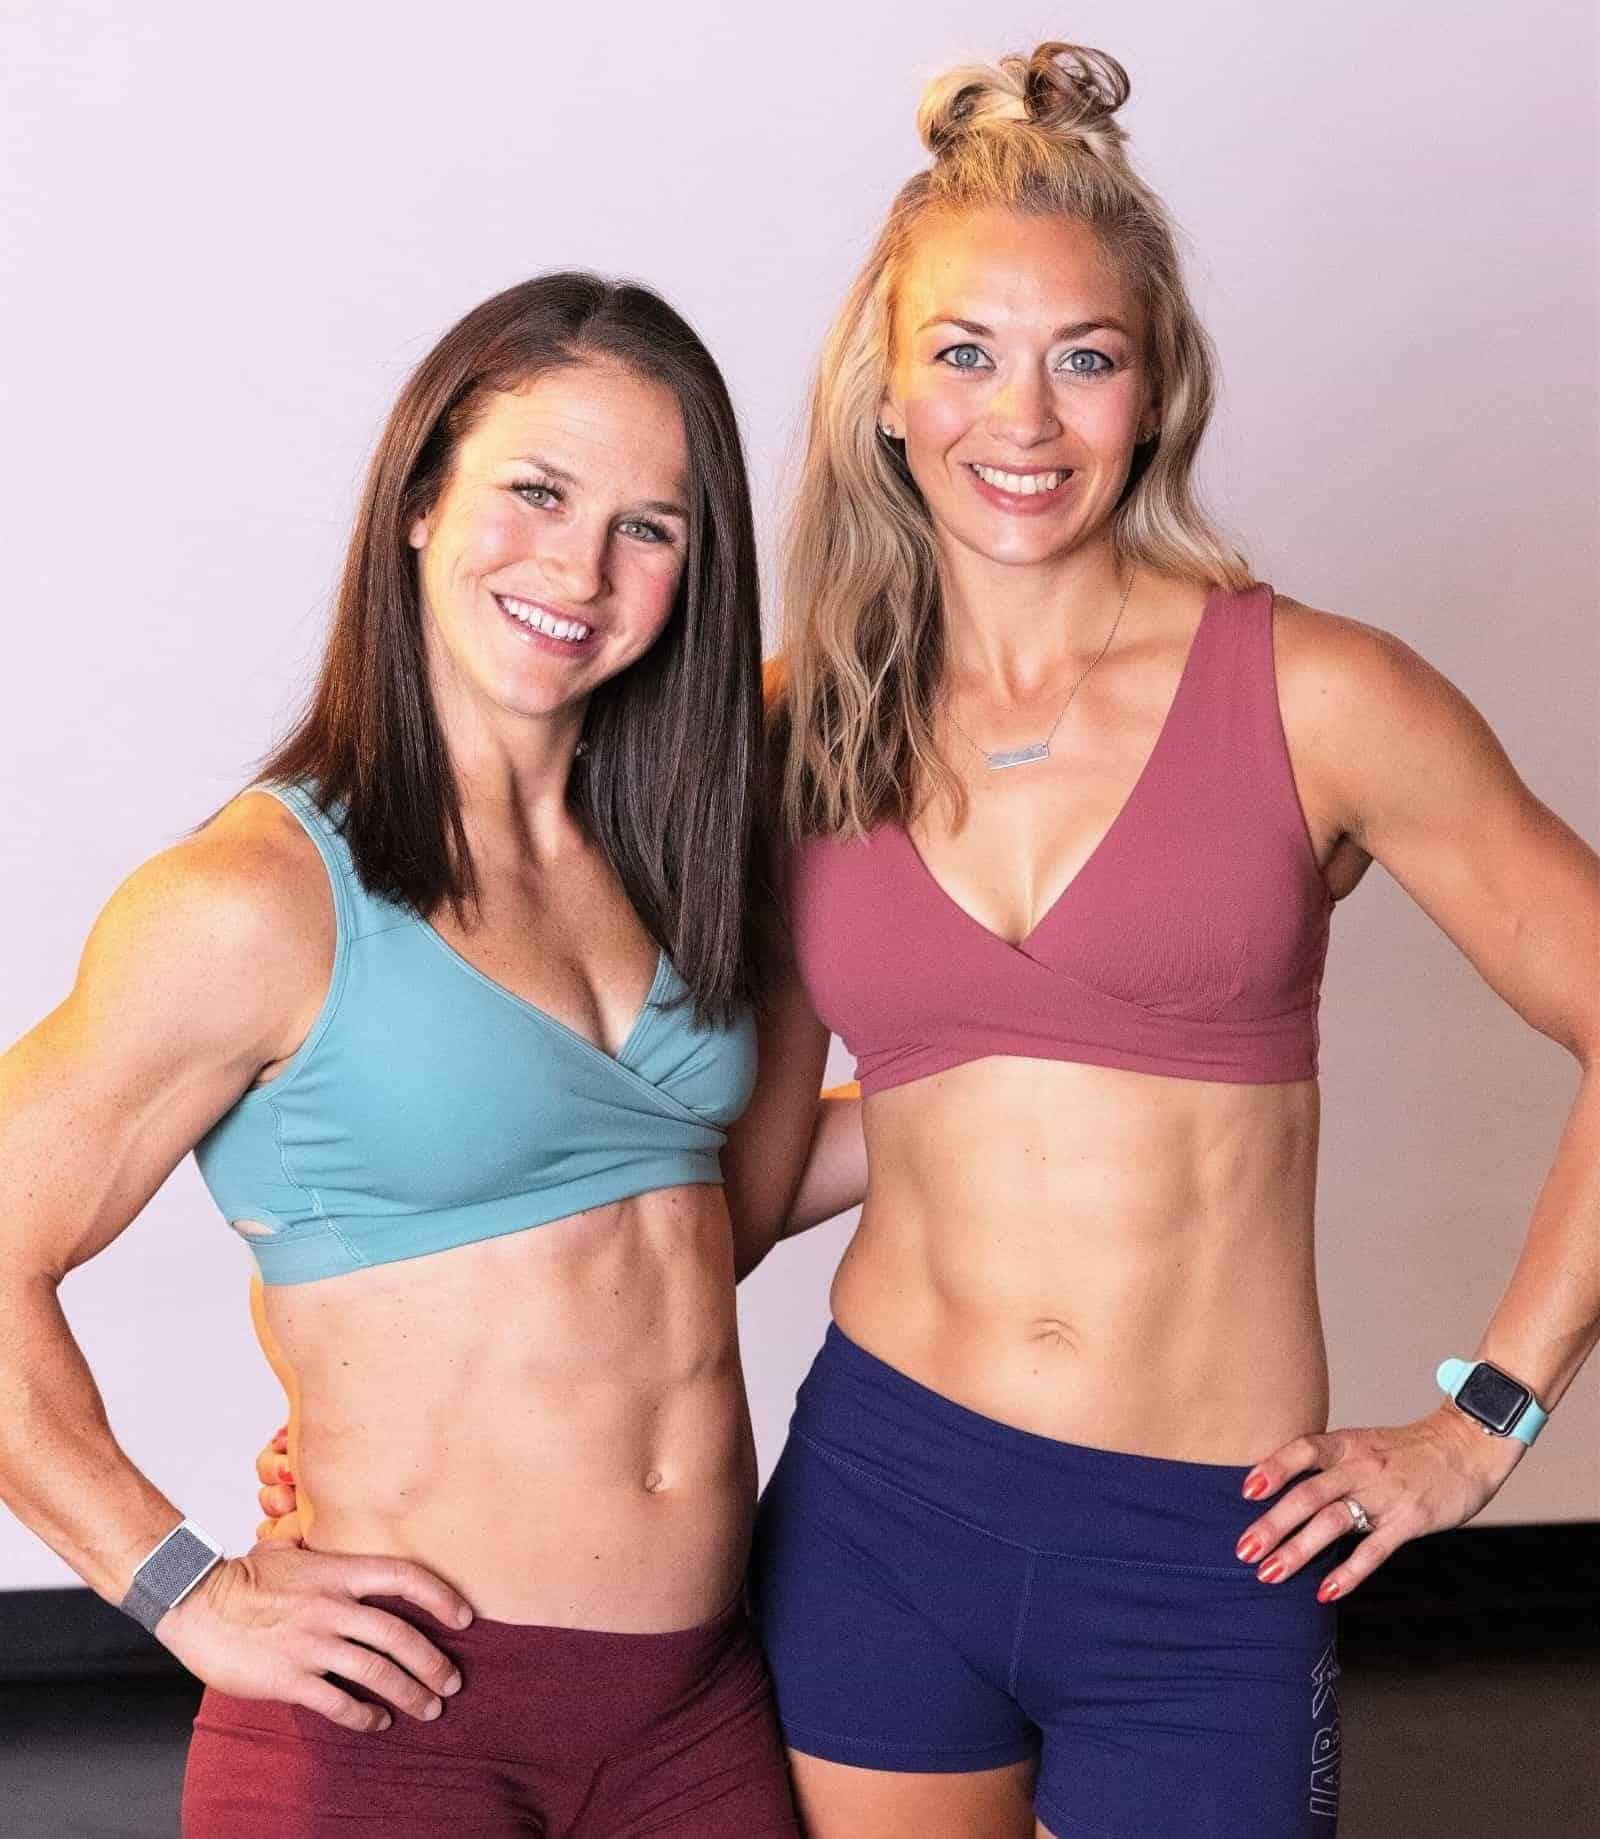 Kari Pearce - 4x Fittest Woman in the US and Creator of PowerAbs and PHIIT